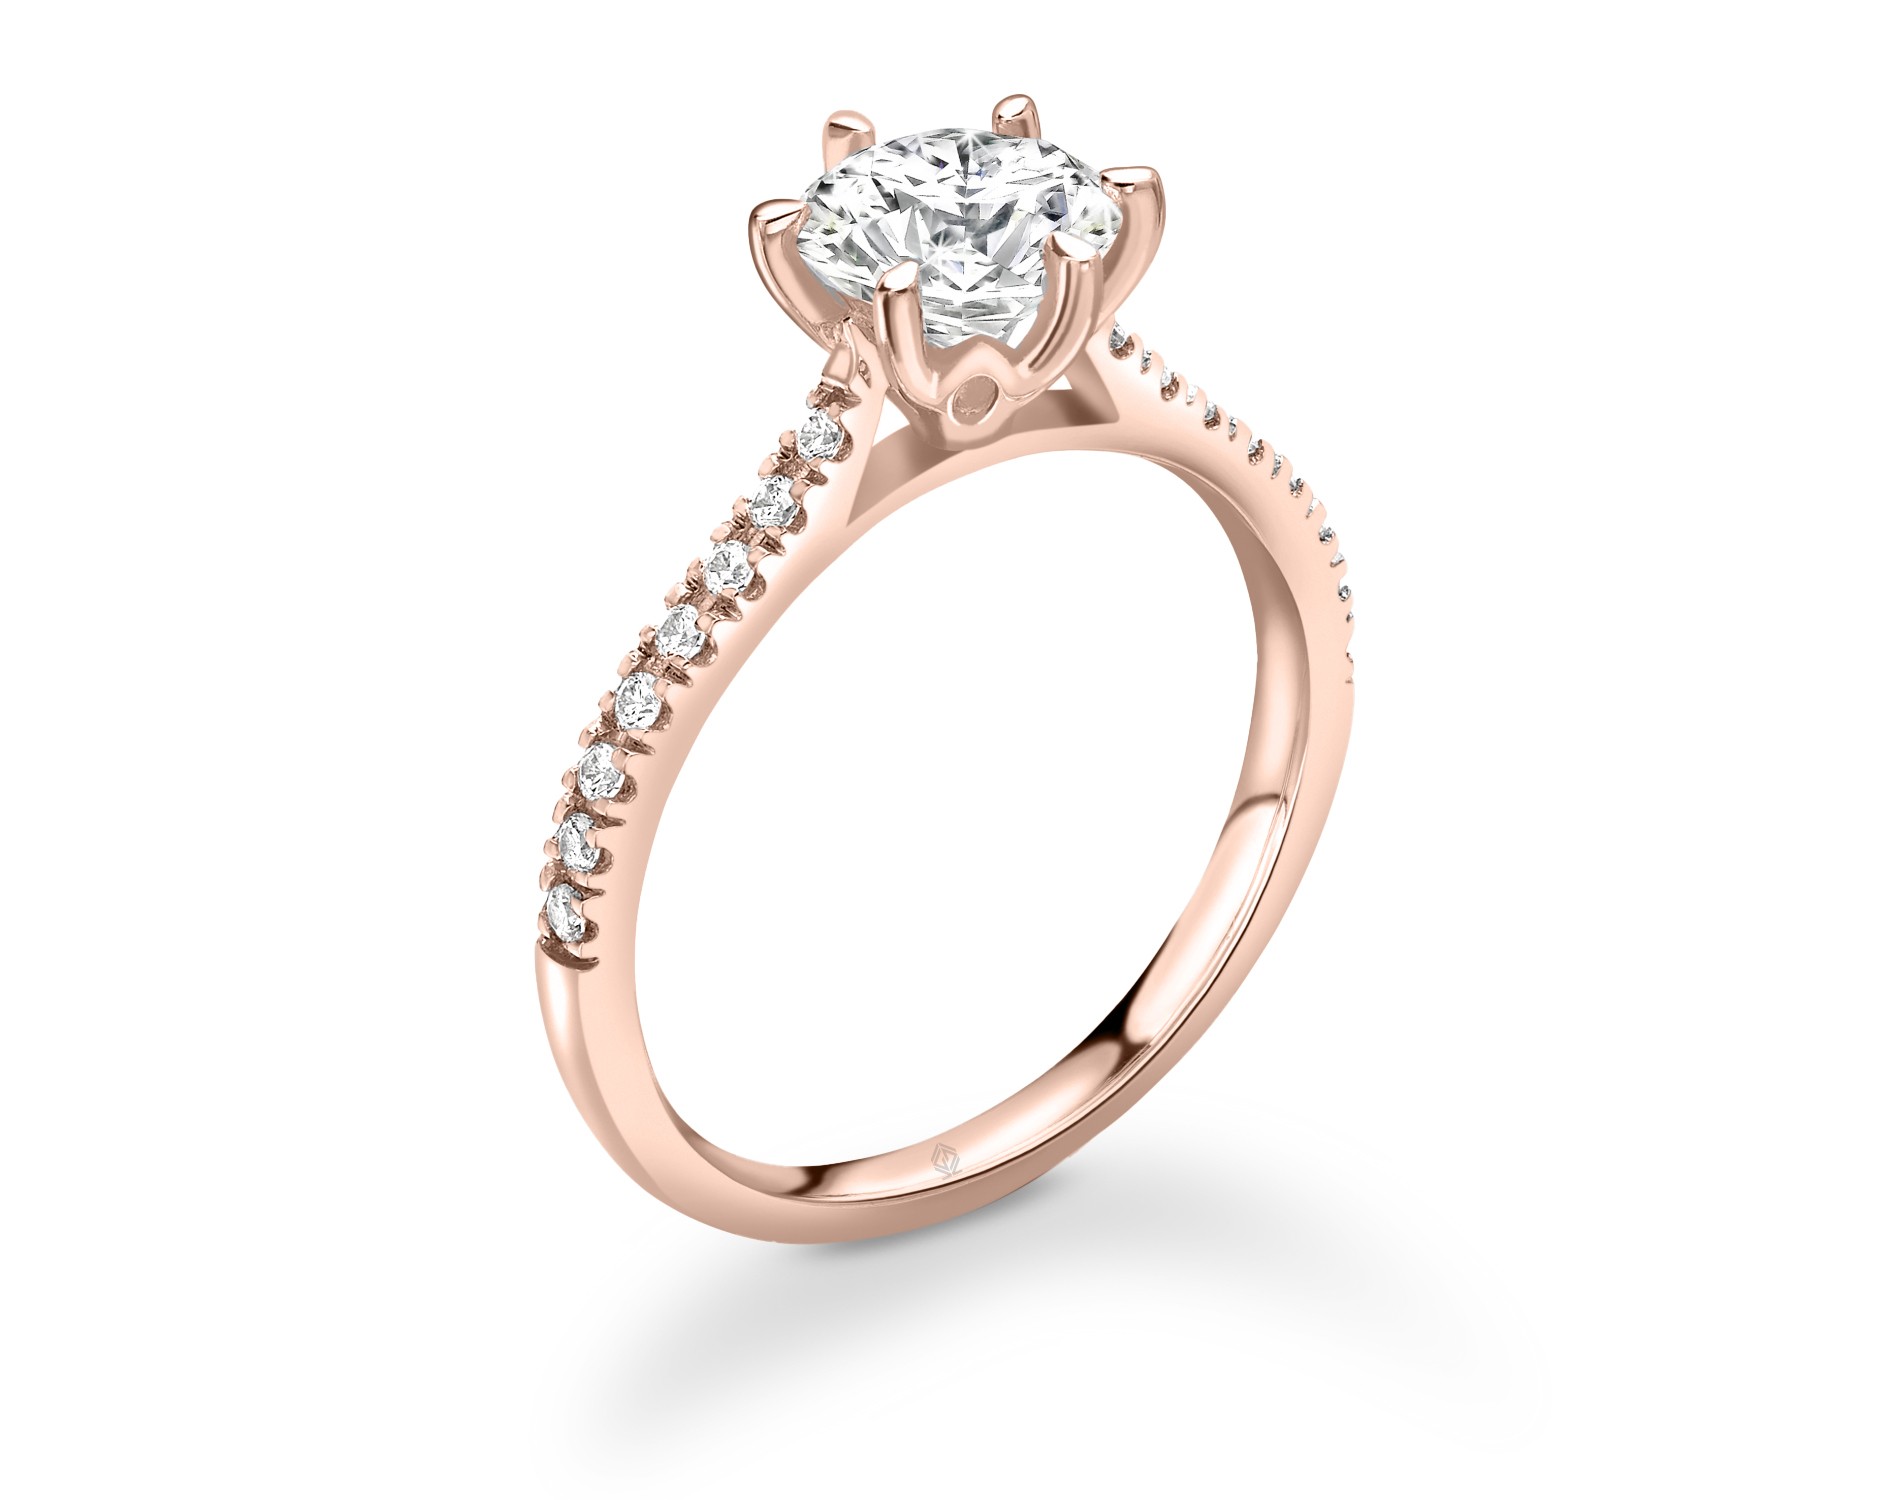 18K ROSE GOLD ROUND CUT 6 PRONGS DIAMOND ENGAGEMENT RING WITH SIDE STONES PAVE SET